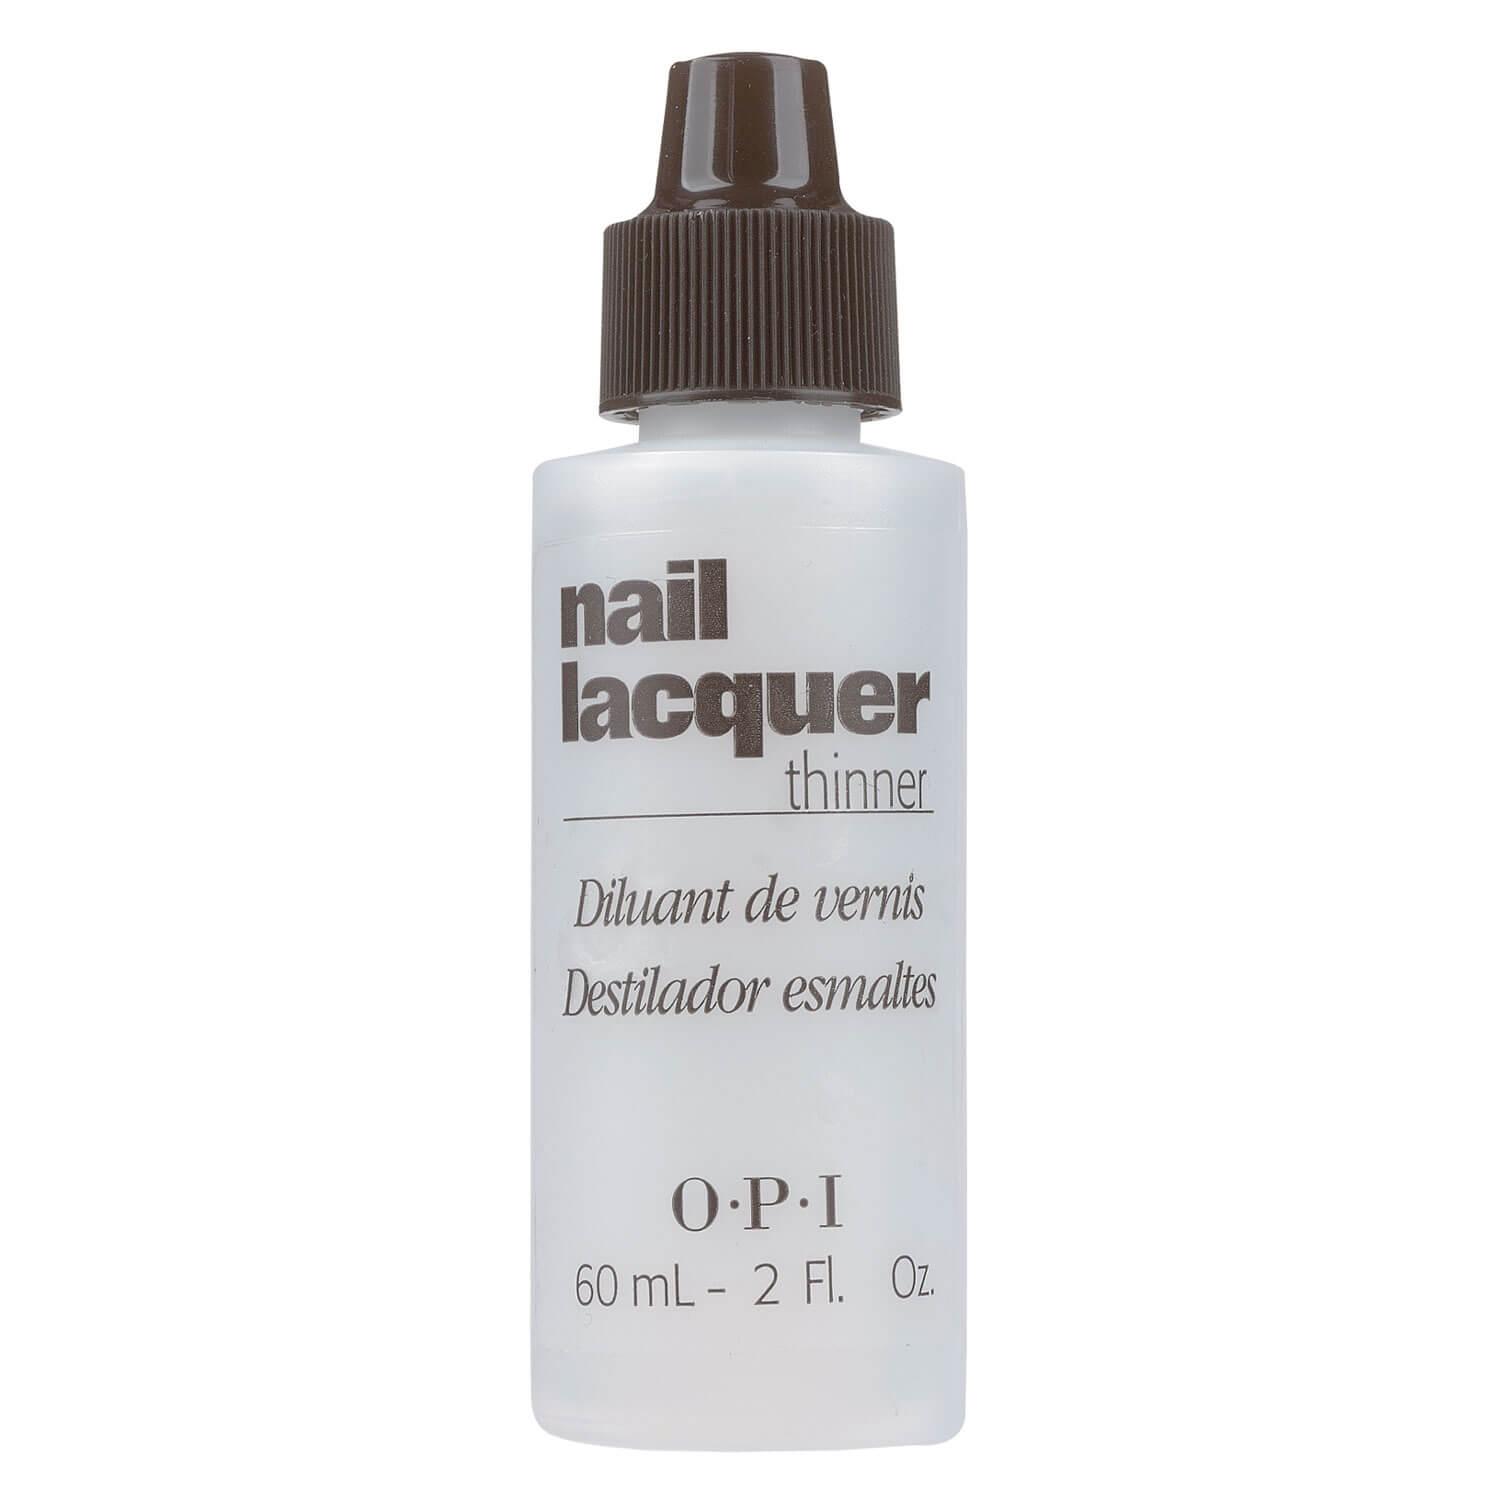 Nail lacquer thinner - Nail lacquer thinner